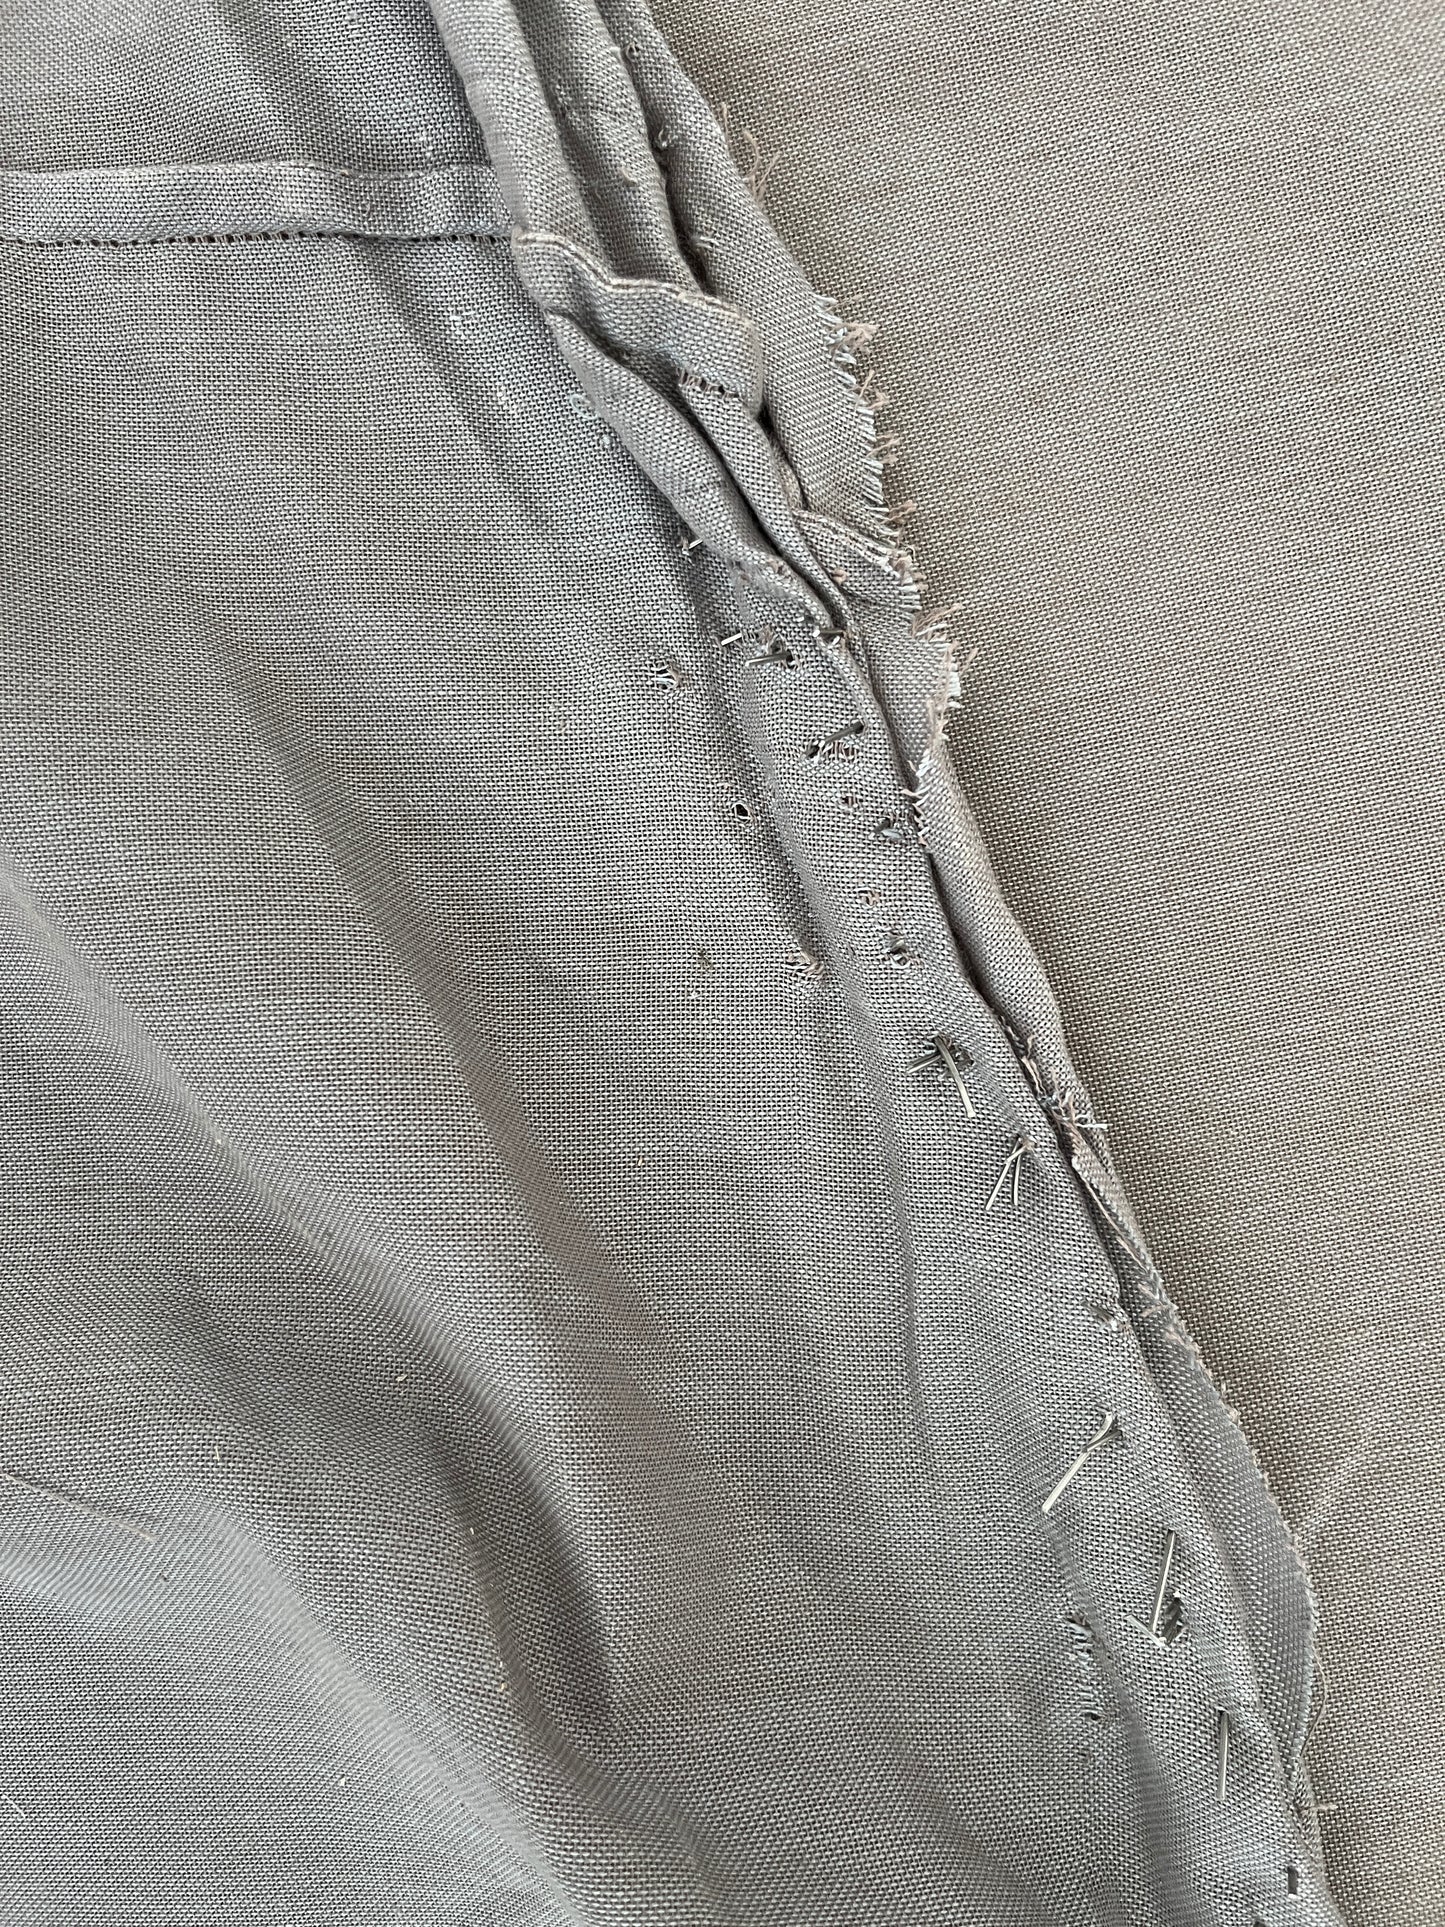 USED UP | Canadian Pavilion | Gray Fabric, 2.5.1